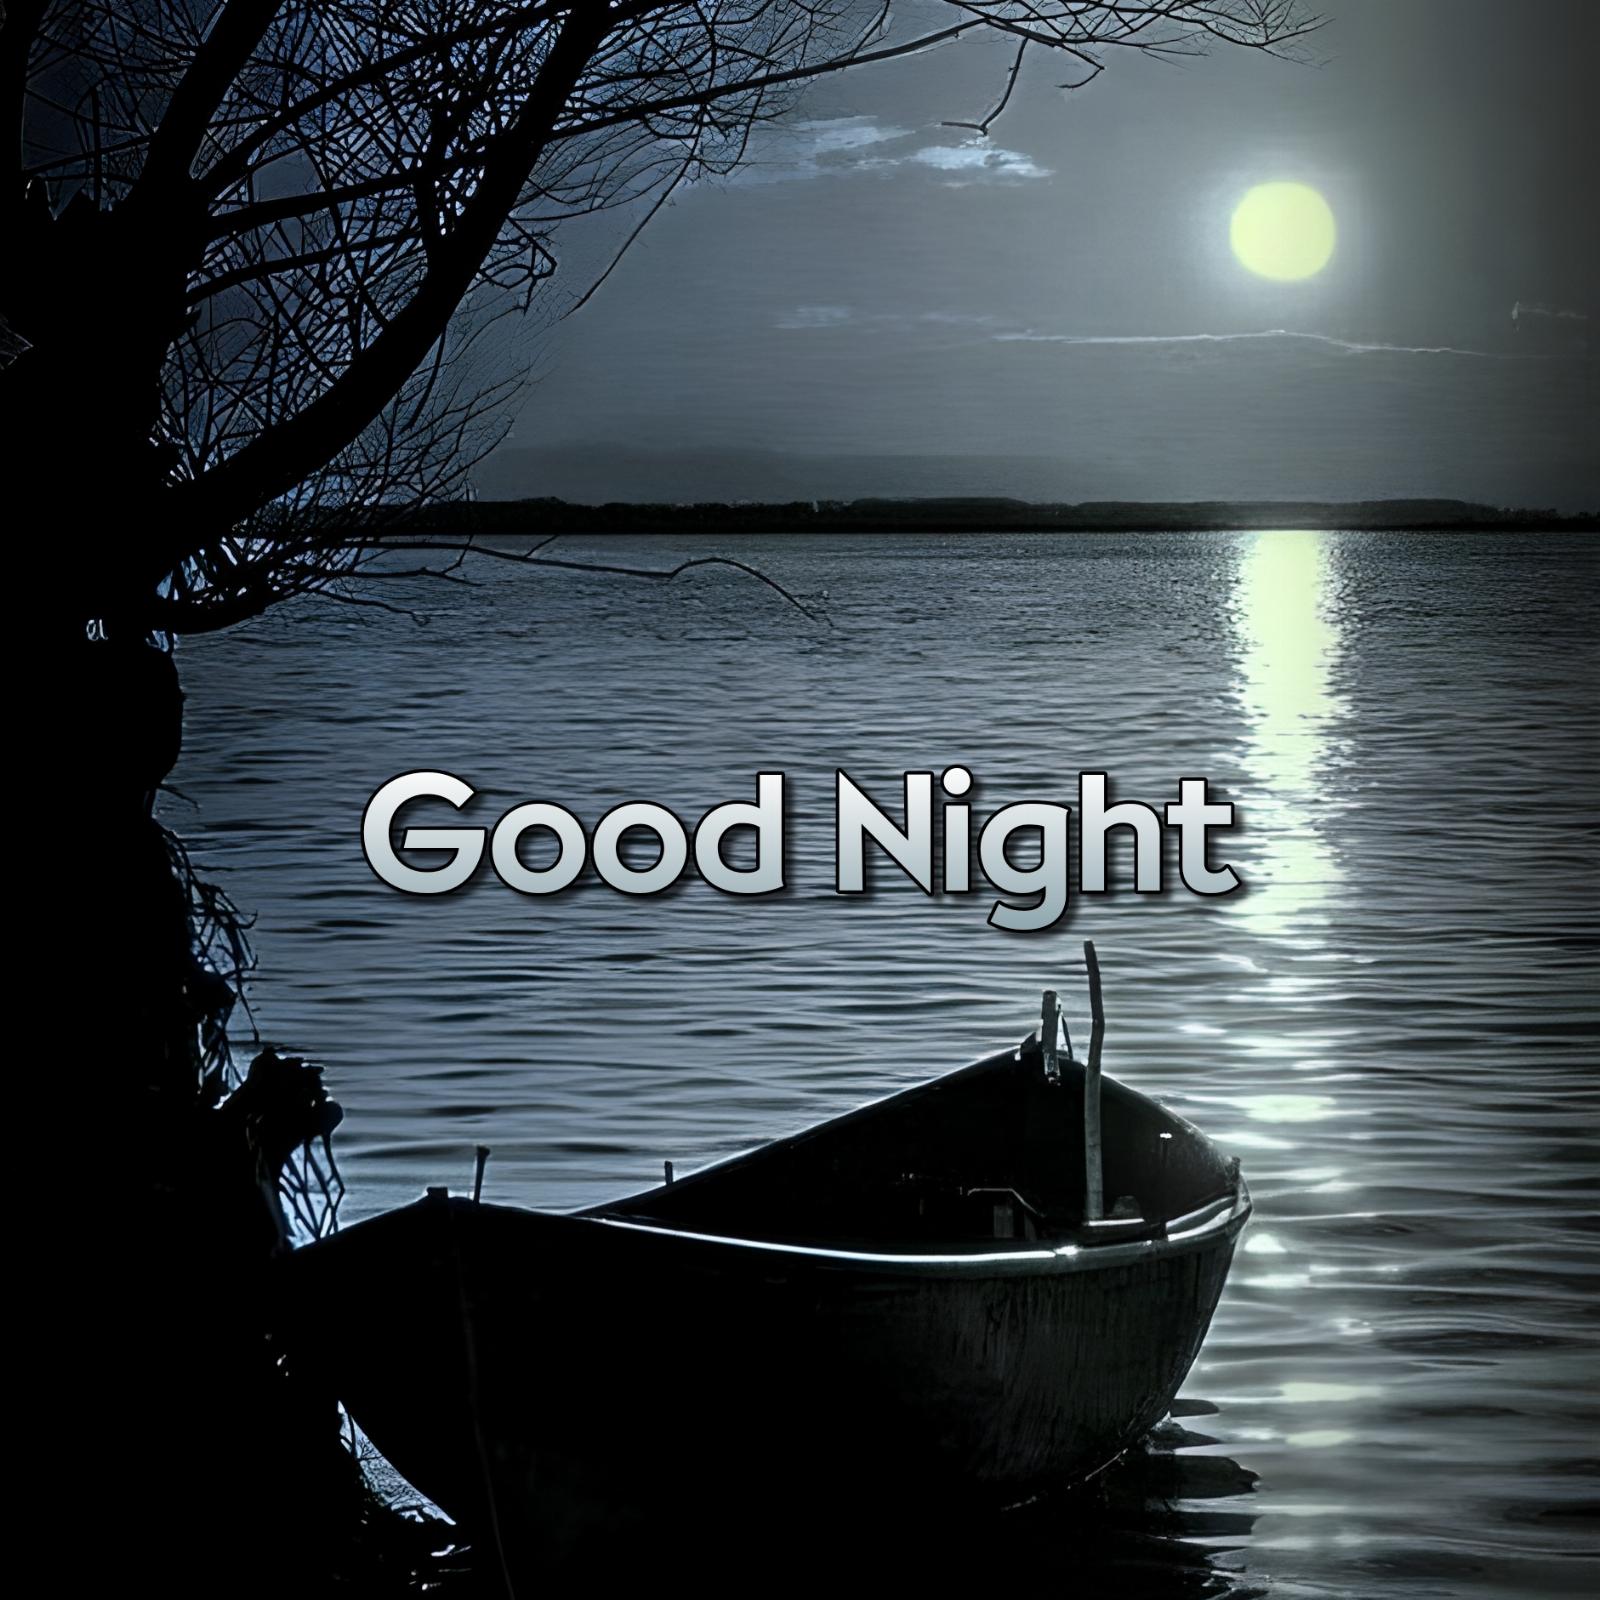 Good Night Boat Moon Images